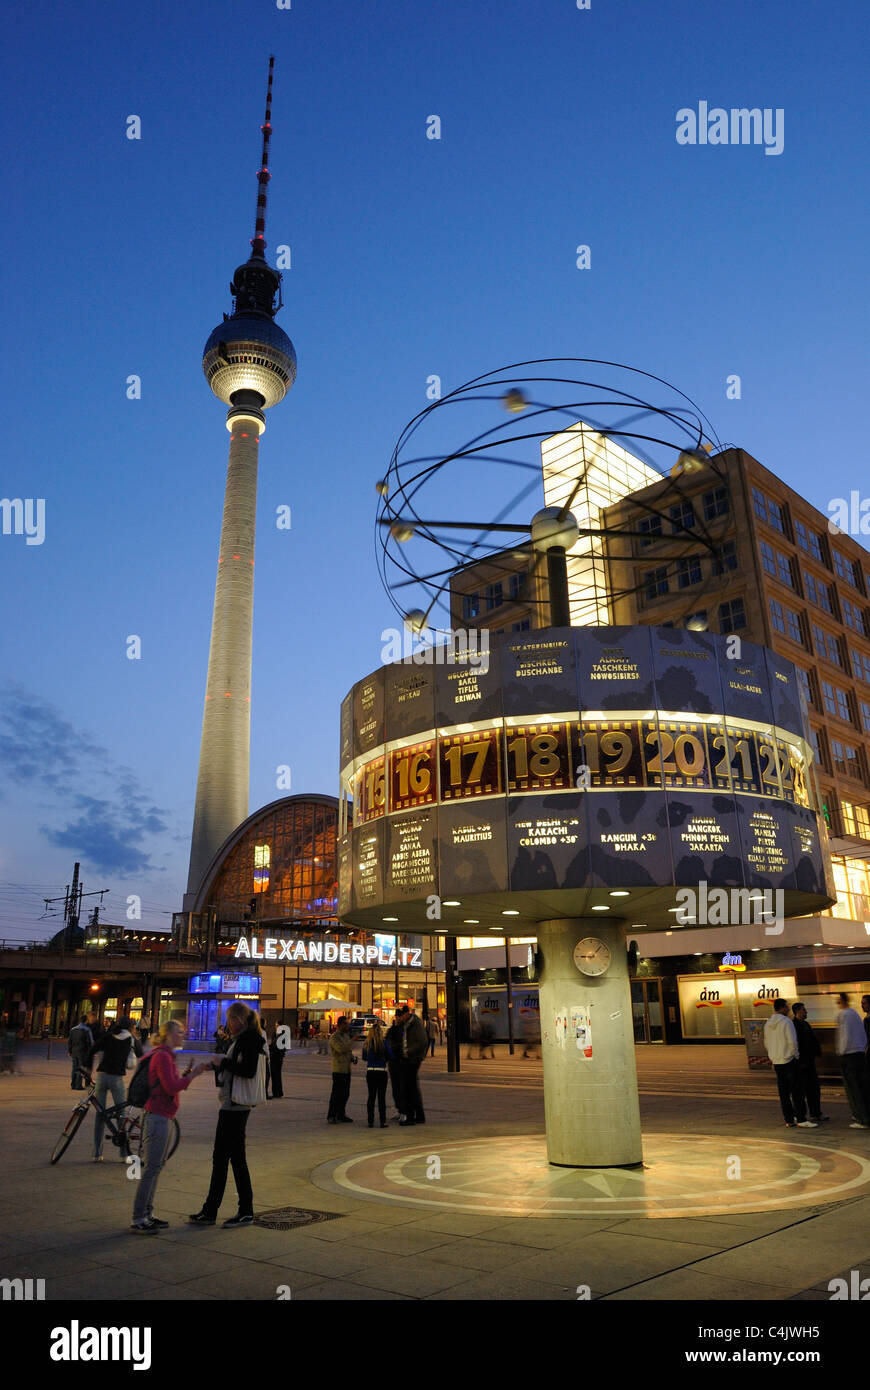 Alexanderplatz square with world clock, Alexanderplatz station and TV tower at dusk, Mitte district, Berlin, Germany, Europe Stock Photo